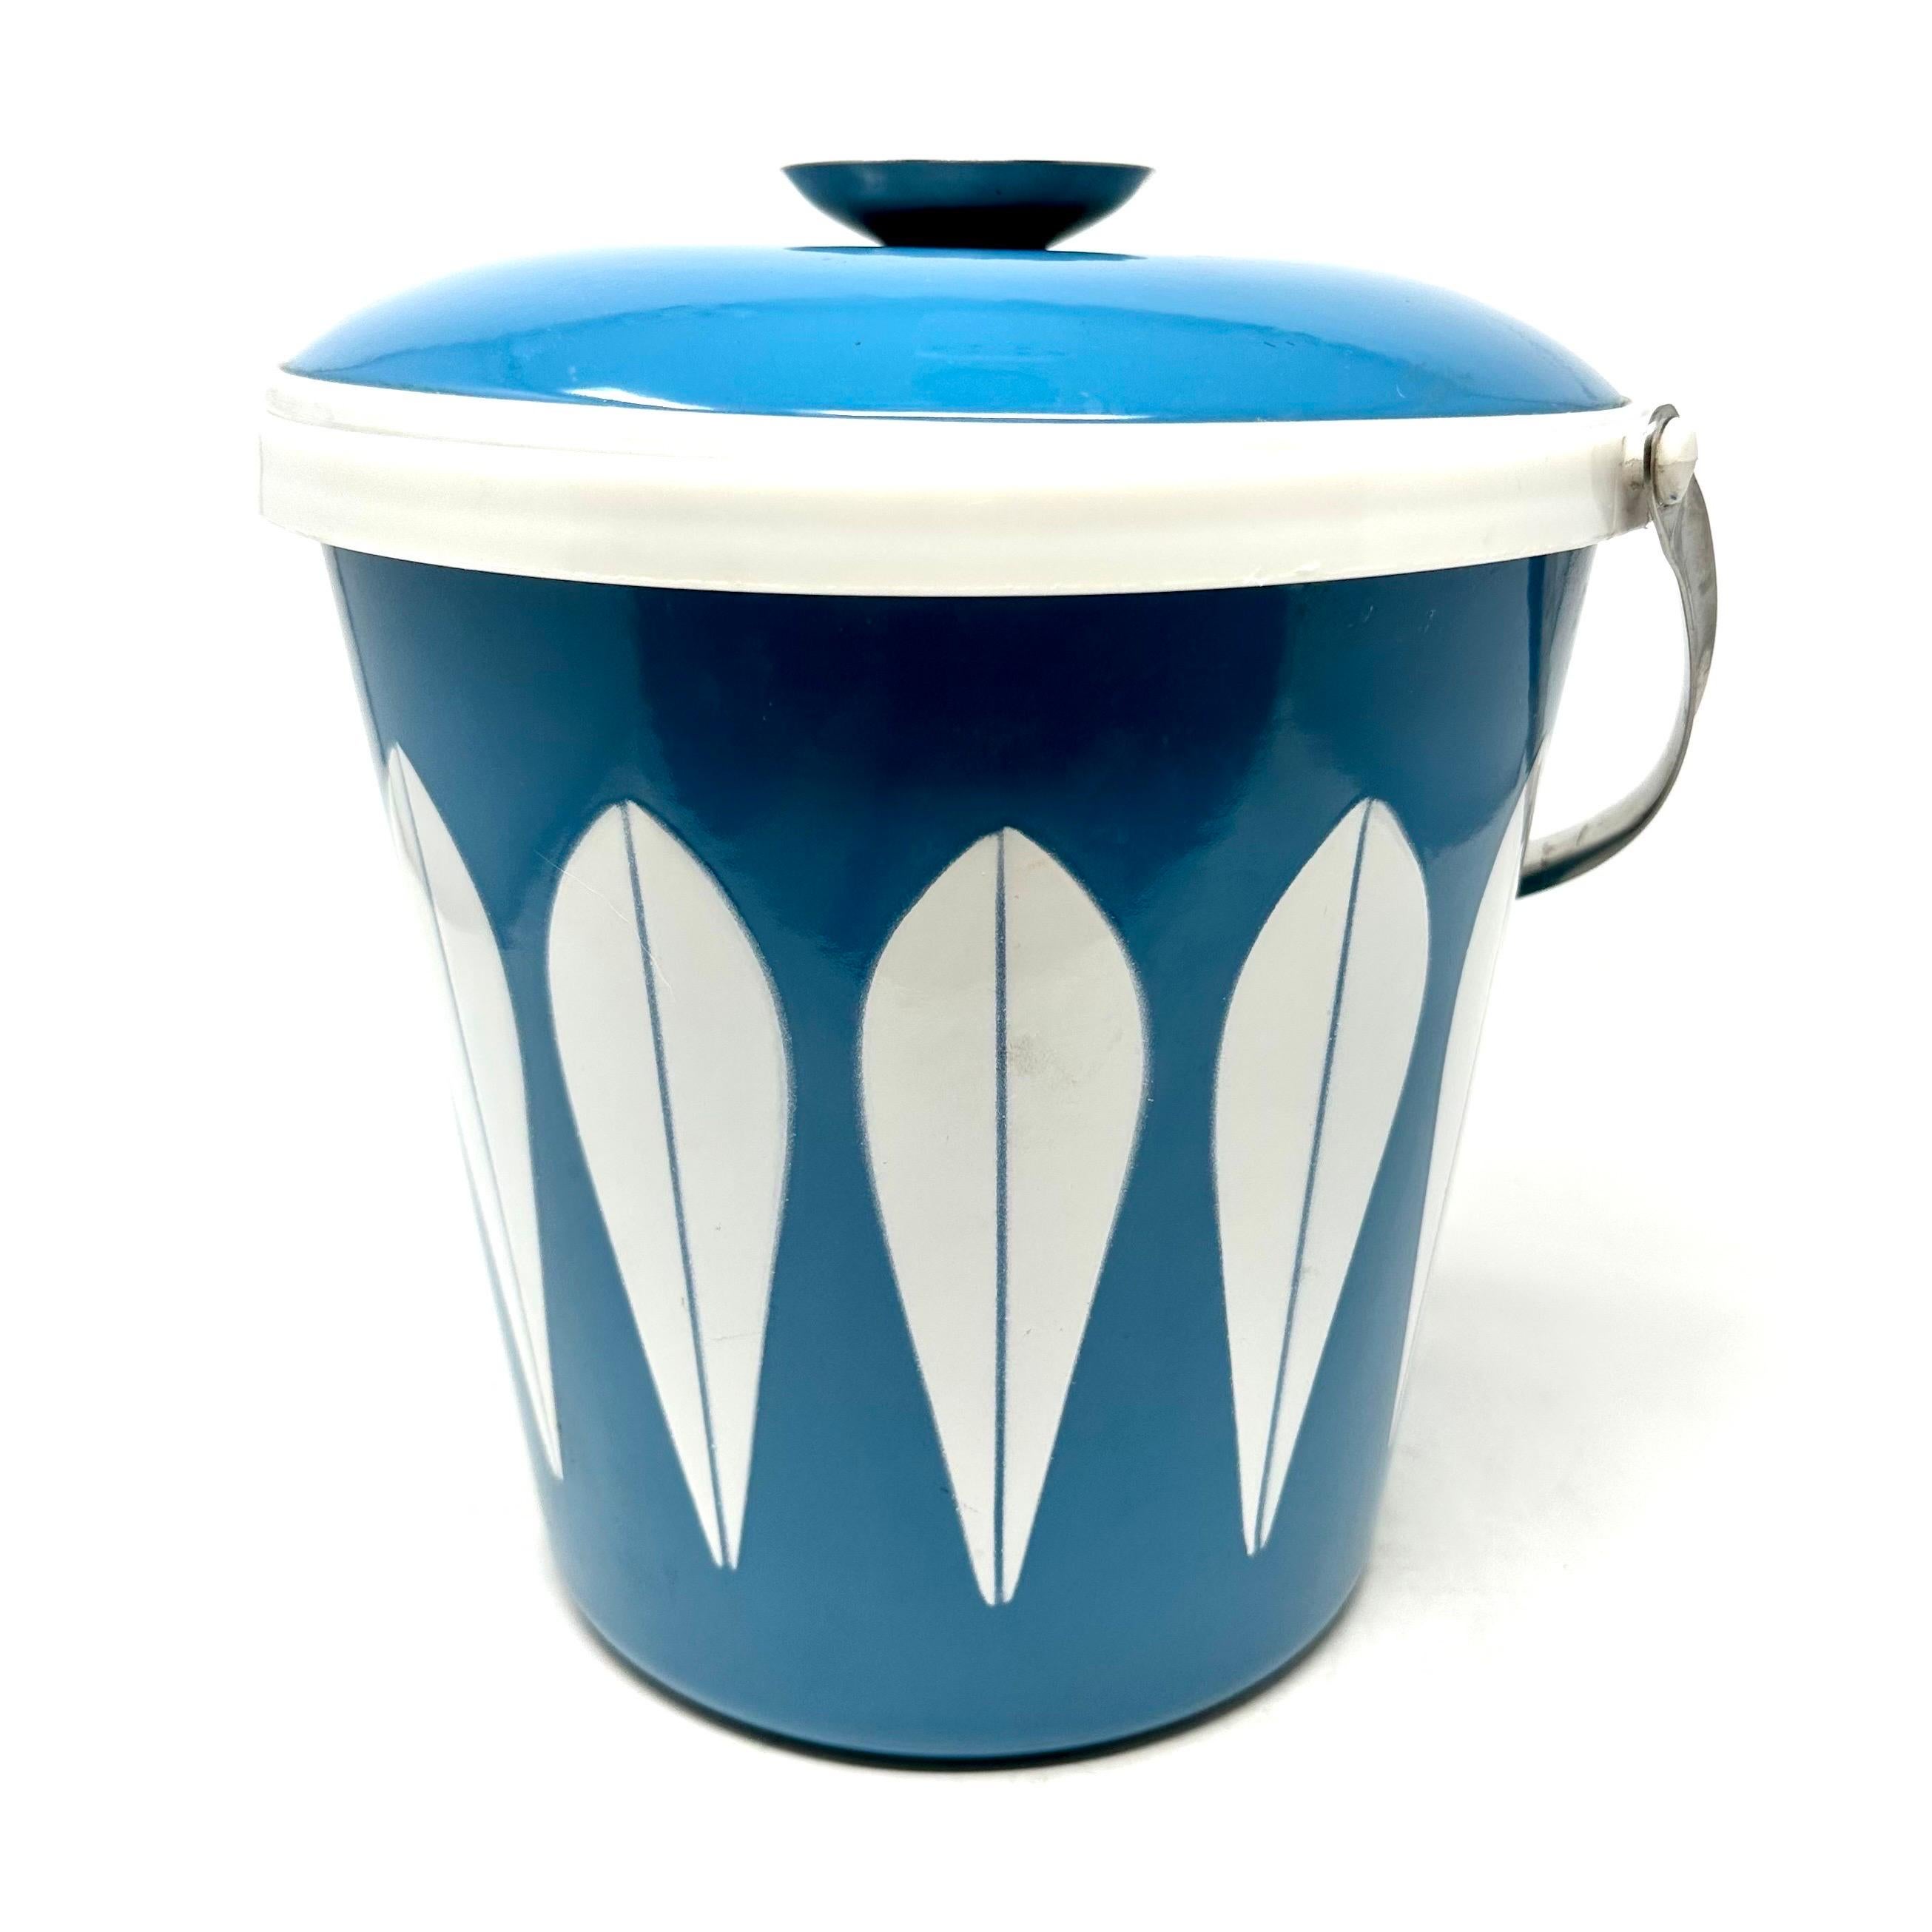 Mid-century ice bucket by Grete Prytz Kittelsen for Cathrineholm, made in Norway. The ice bucket is in Kittelsen’s signature “Lotus” pattern. and is enameled metal with a plastic liner. In excellent condition.

Diameter: 9 in / Height: 10 in